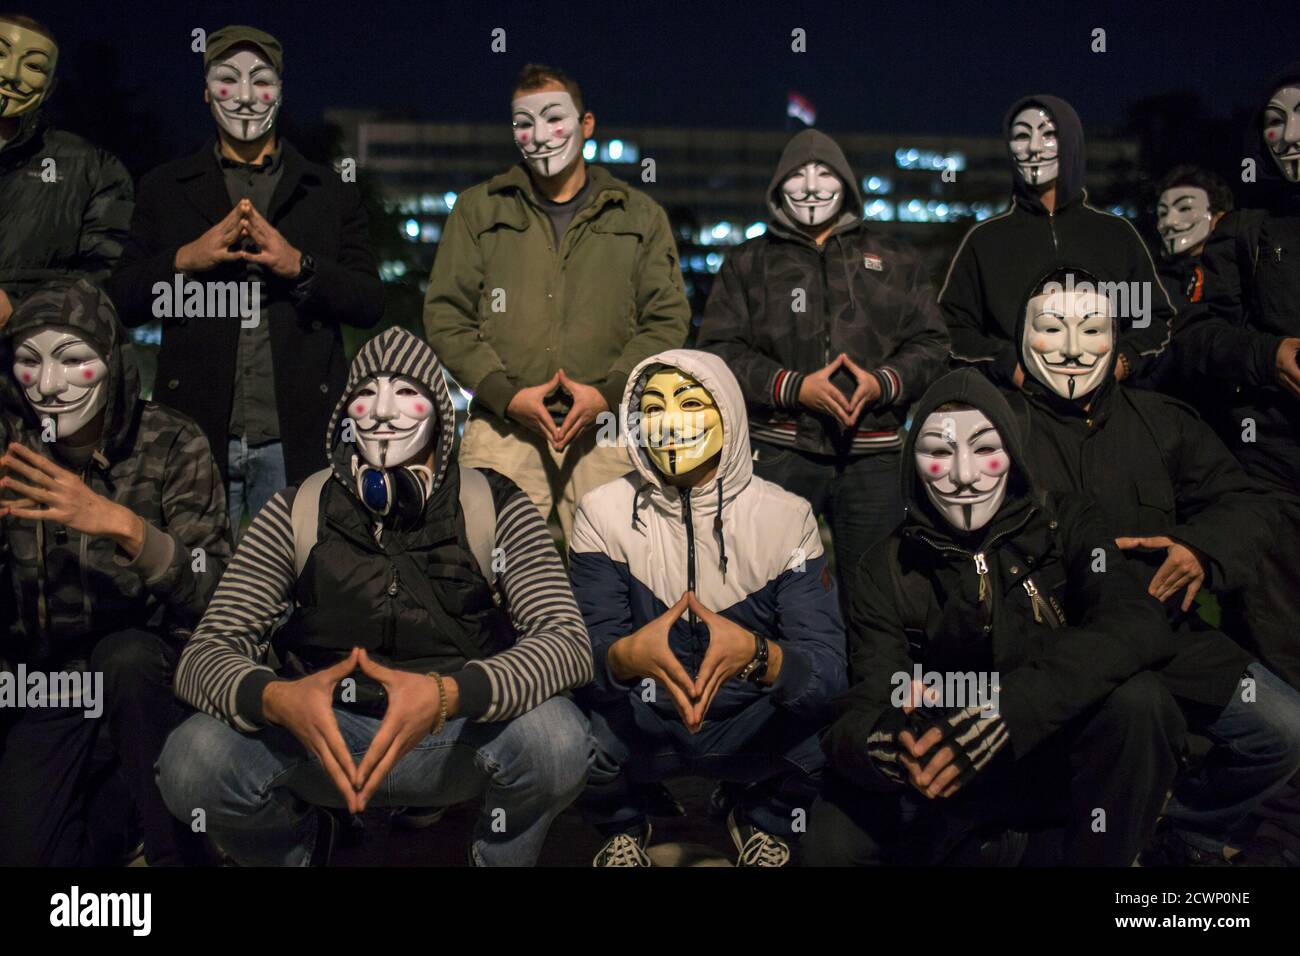 Protesters wearing Guy Fawkes masks pose for a picture in a park in downtown Belgrade November 5, 2014, on the day marking Guy Fawkes Night. REUTERS/Marko Djurica (SERBIA - Tags: SOCIETY ANNIVERSARY CIVIL UNREST POLITICS) Stock Photo